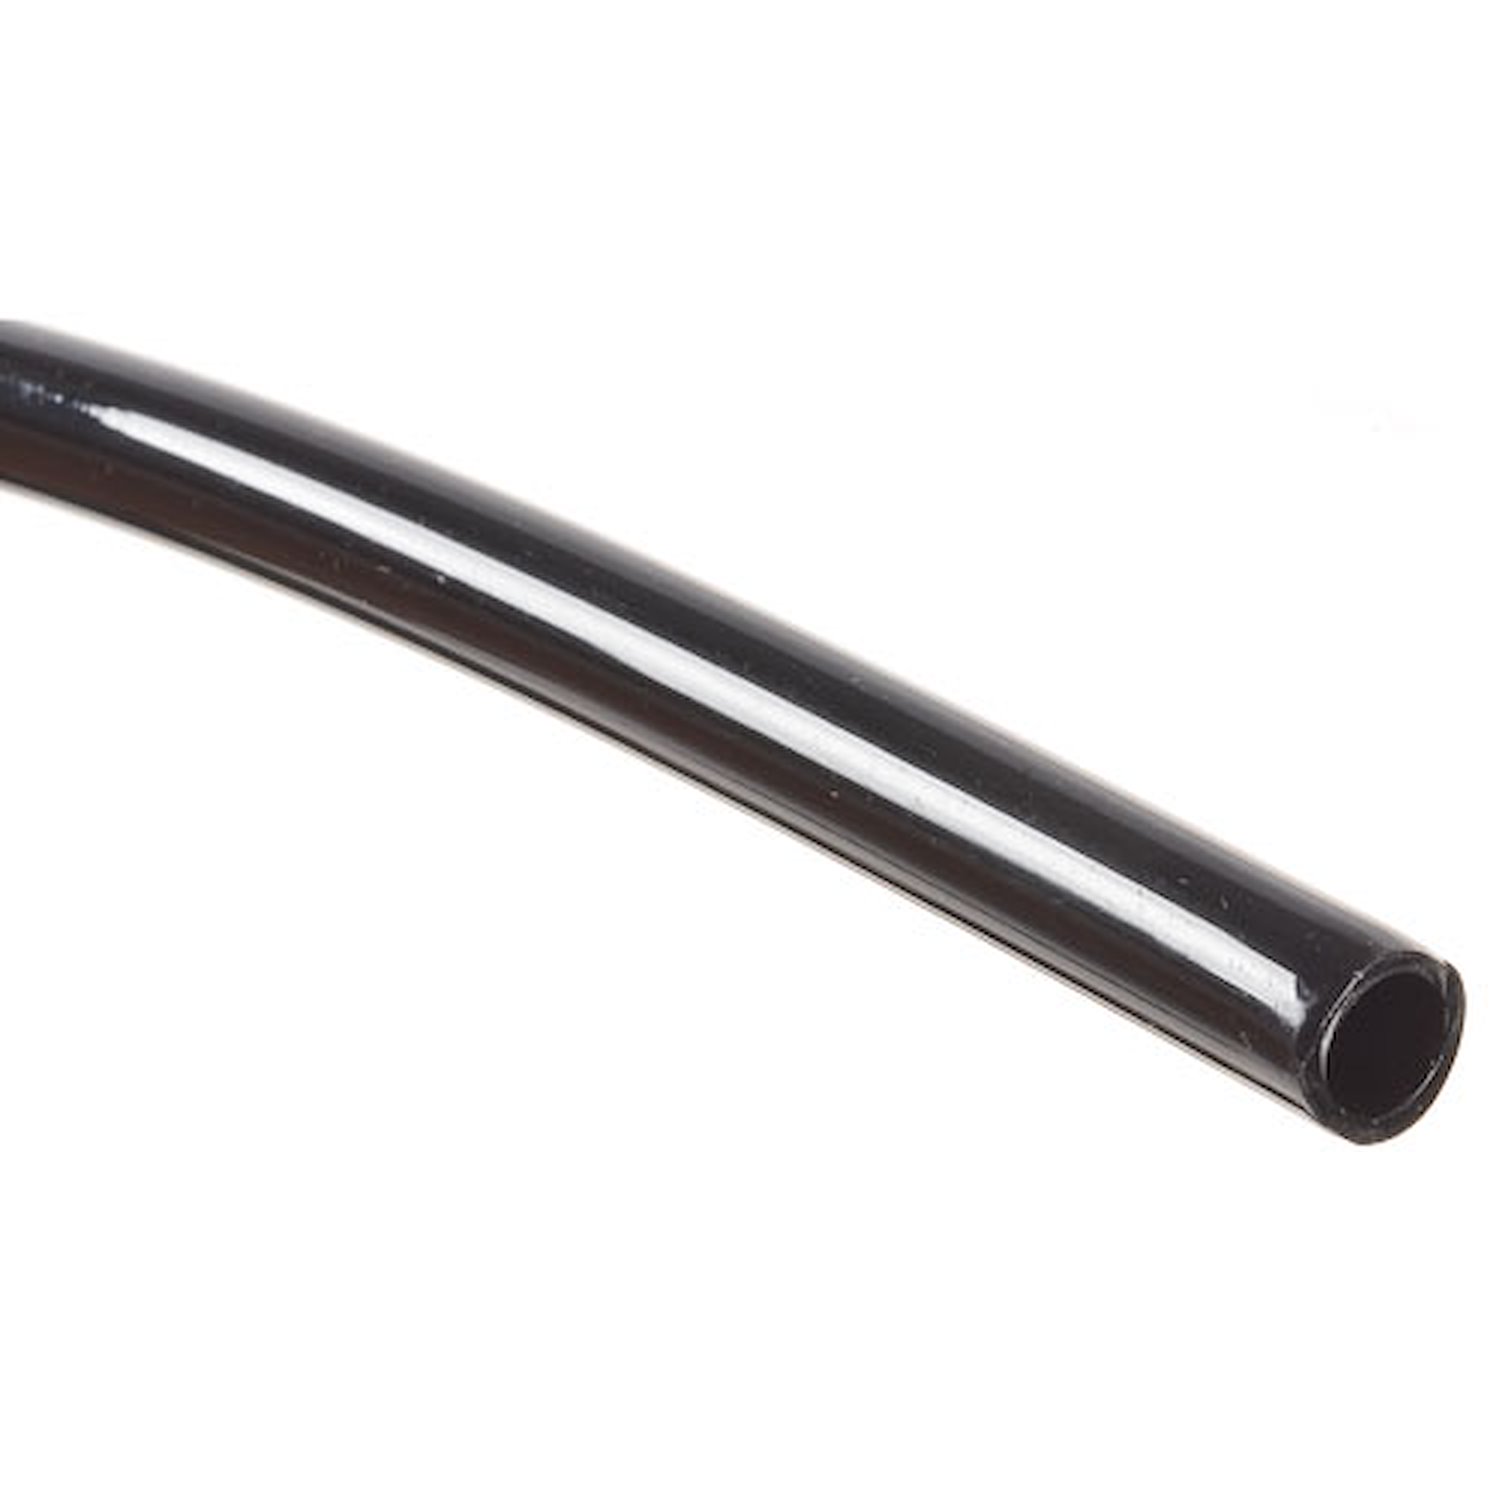 JEGS 159226: Nylon Fuel Injection Tubing